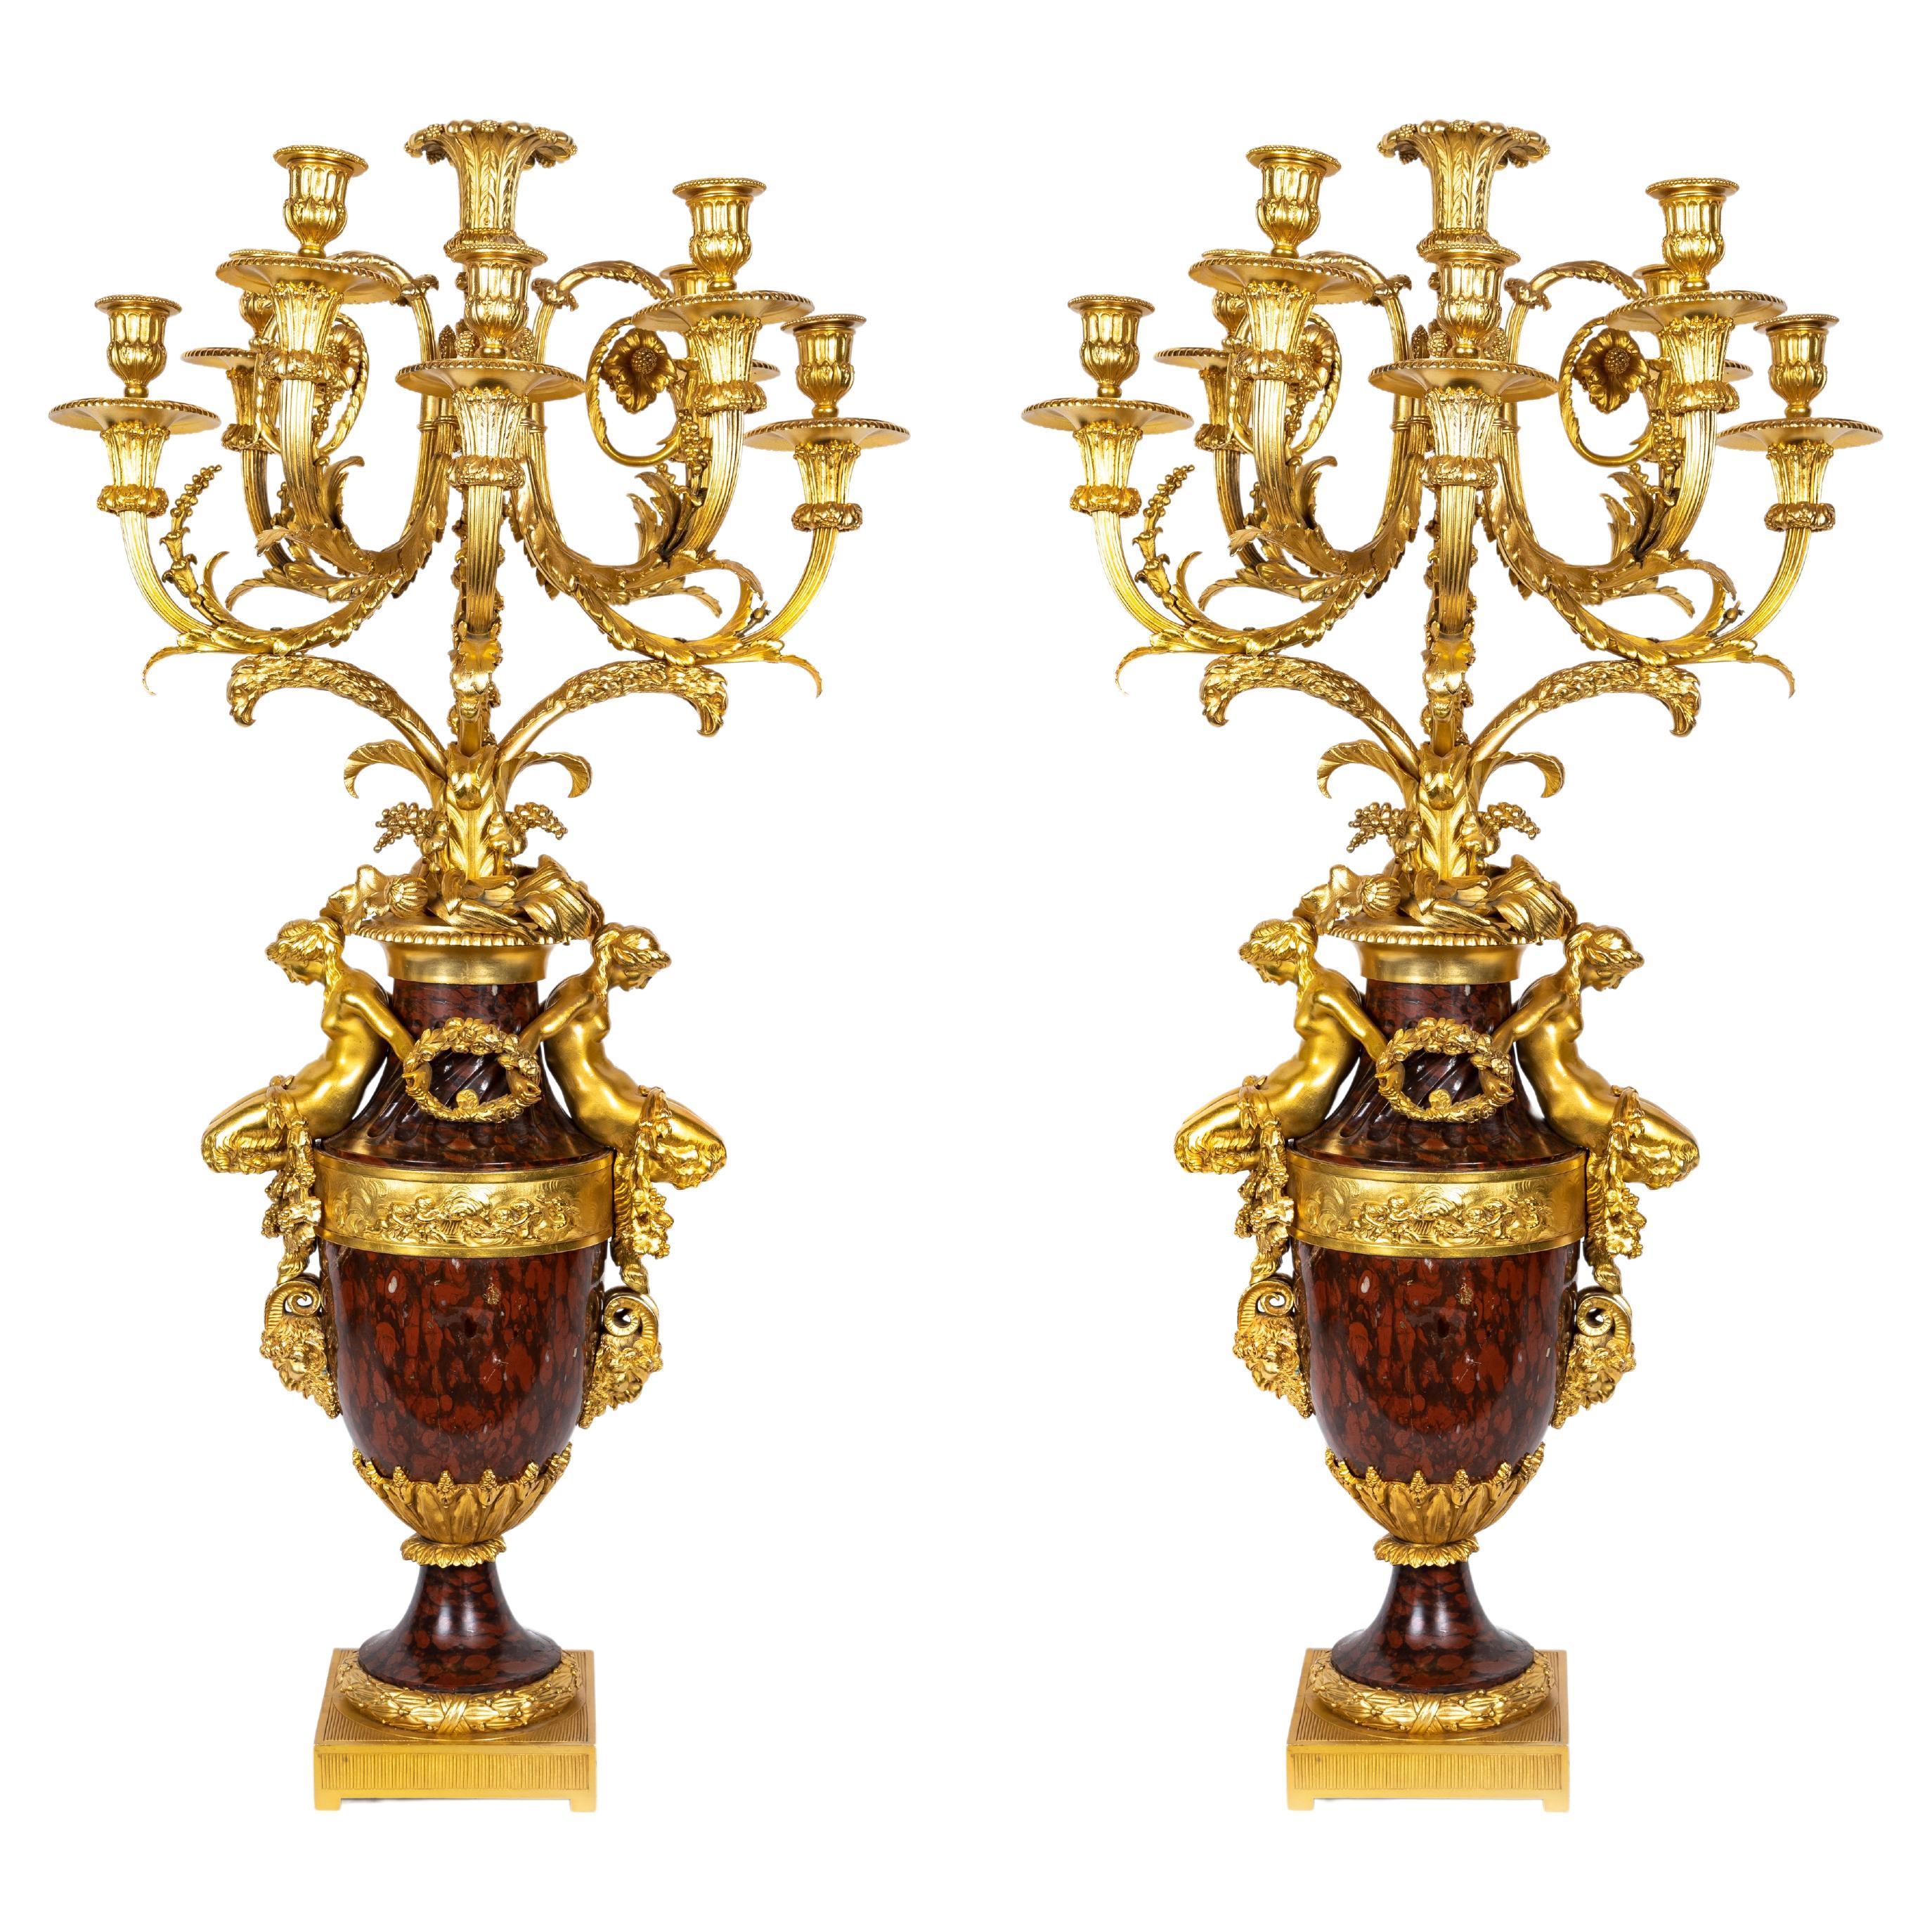 A Pair of Large Antique French Louis XVI Gilt Bronze and Marble Candelabras